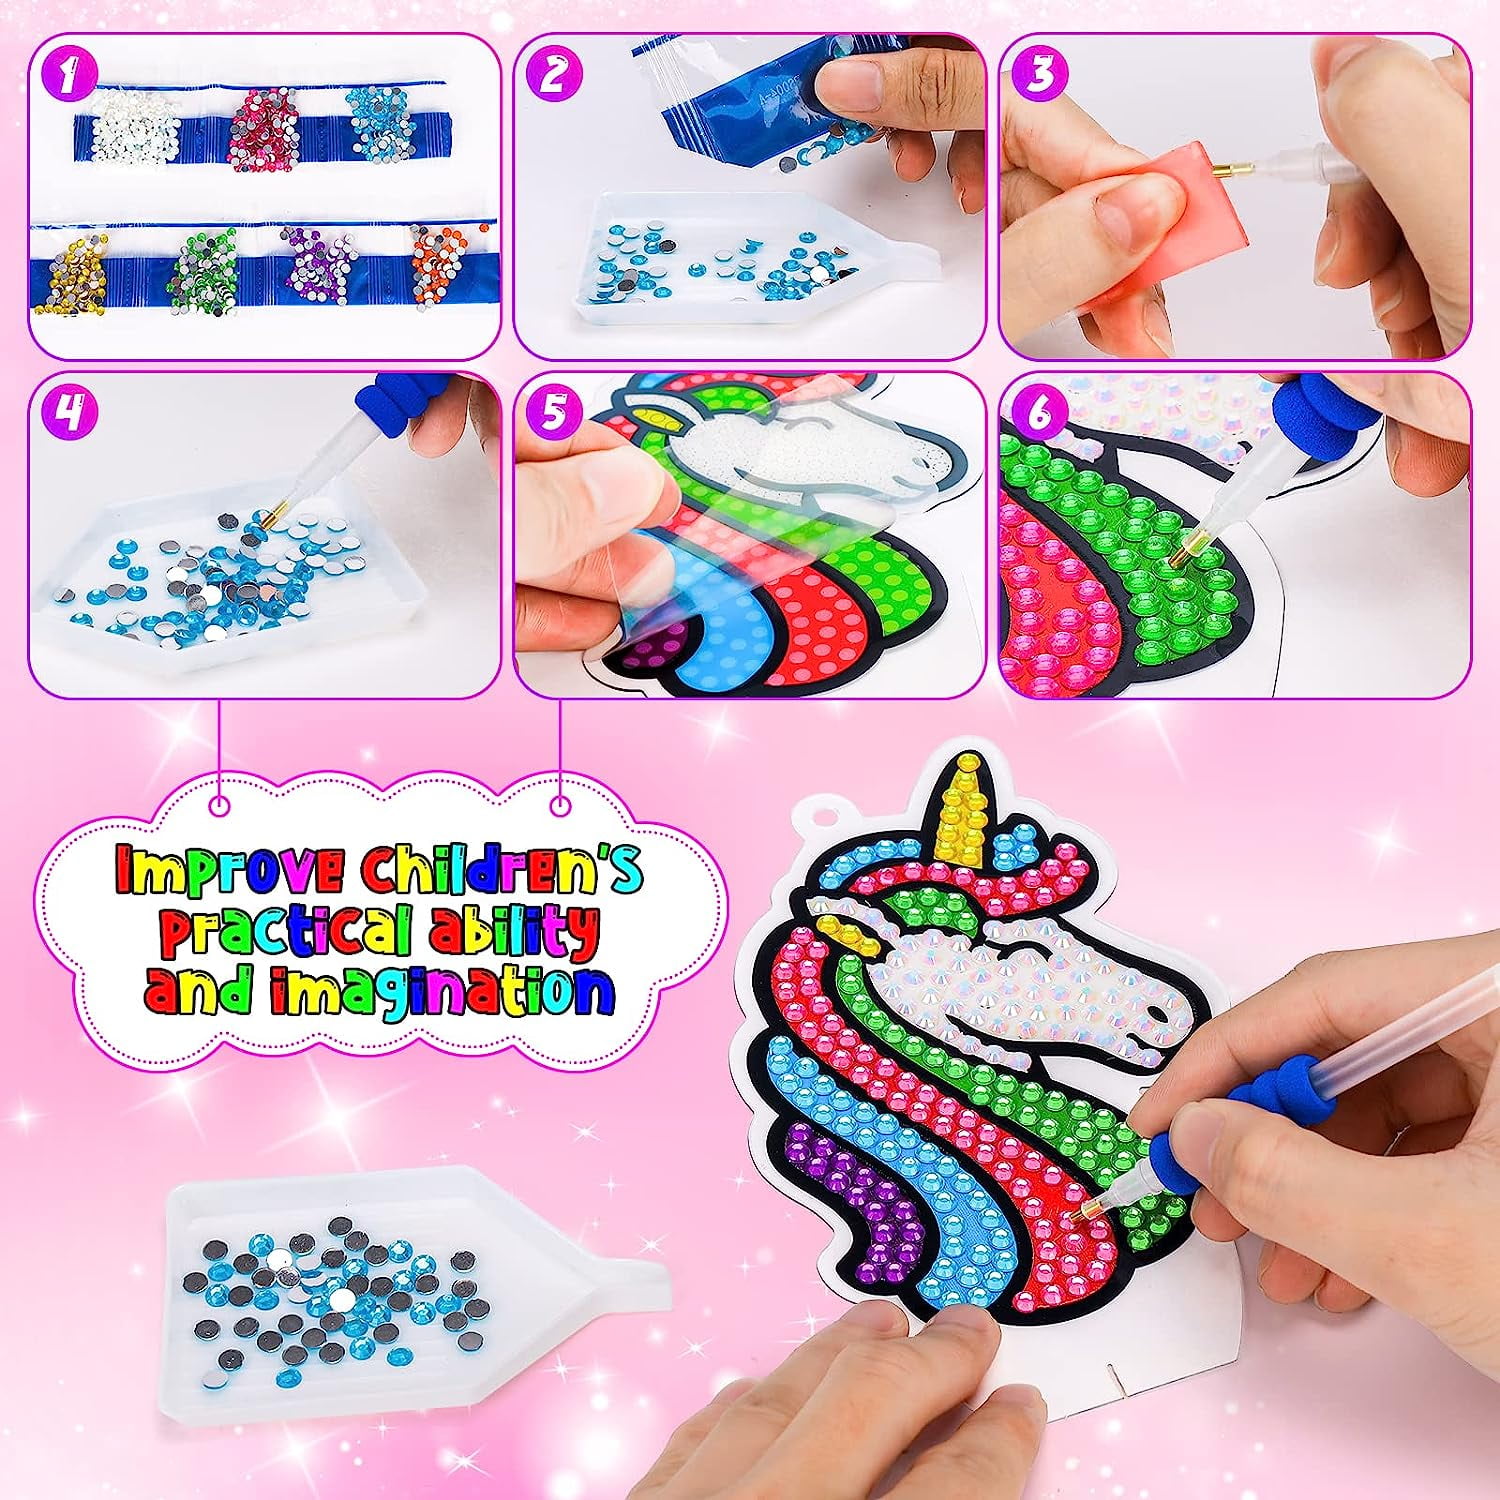 KMUYSL Unicorn Painting Kit, Arts and Crafts for Kids Ages 4-8+, Art  Supplies with 8 Unicorn Figurines, Kids Toy Birthday Gifts for Boys Girls  3-5, 6-8 Years Old - Yahoo Shopping